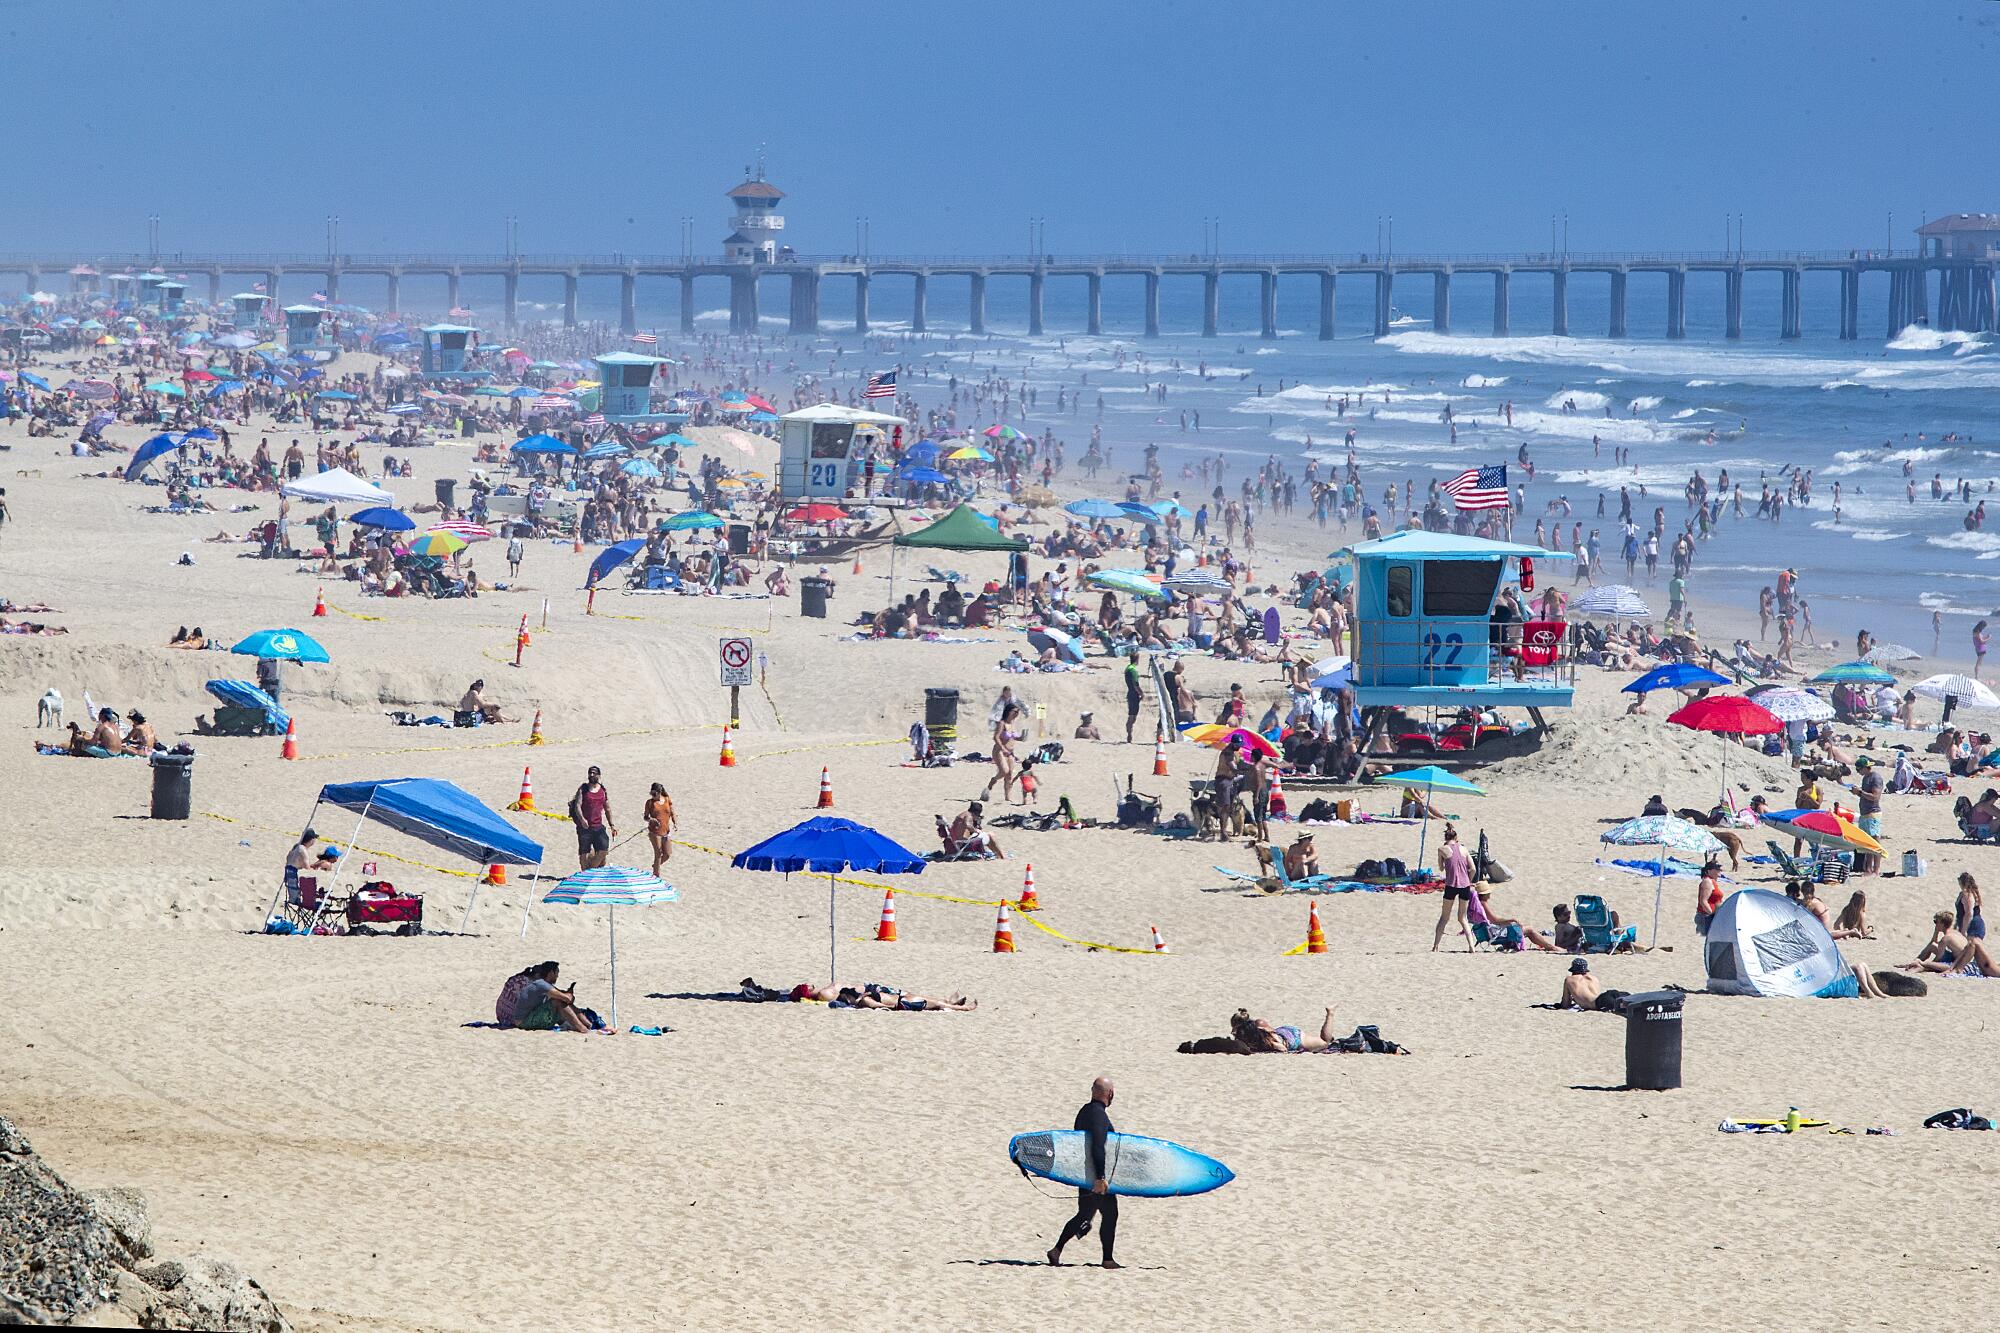 Thousands of beachgoers enjoyed a warm, sunny day at Huntington Beach despite state-mandated stay-at-home orders.